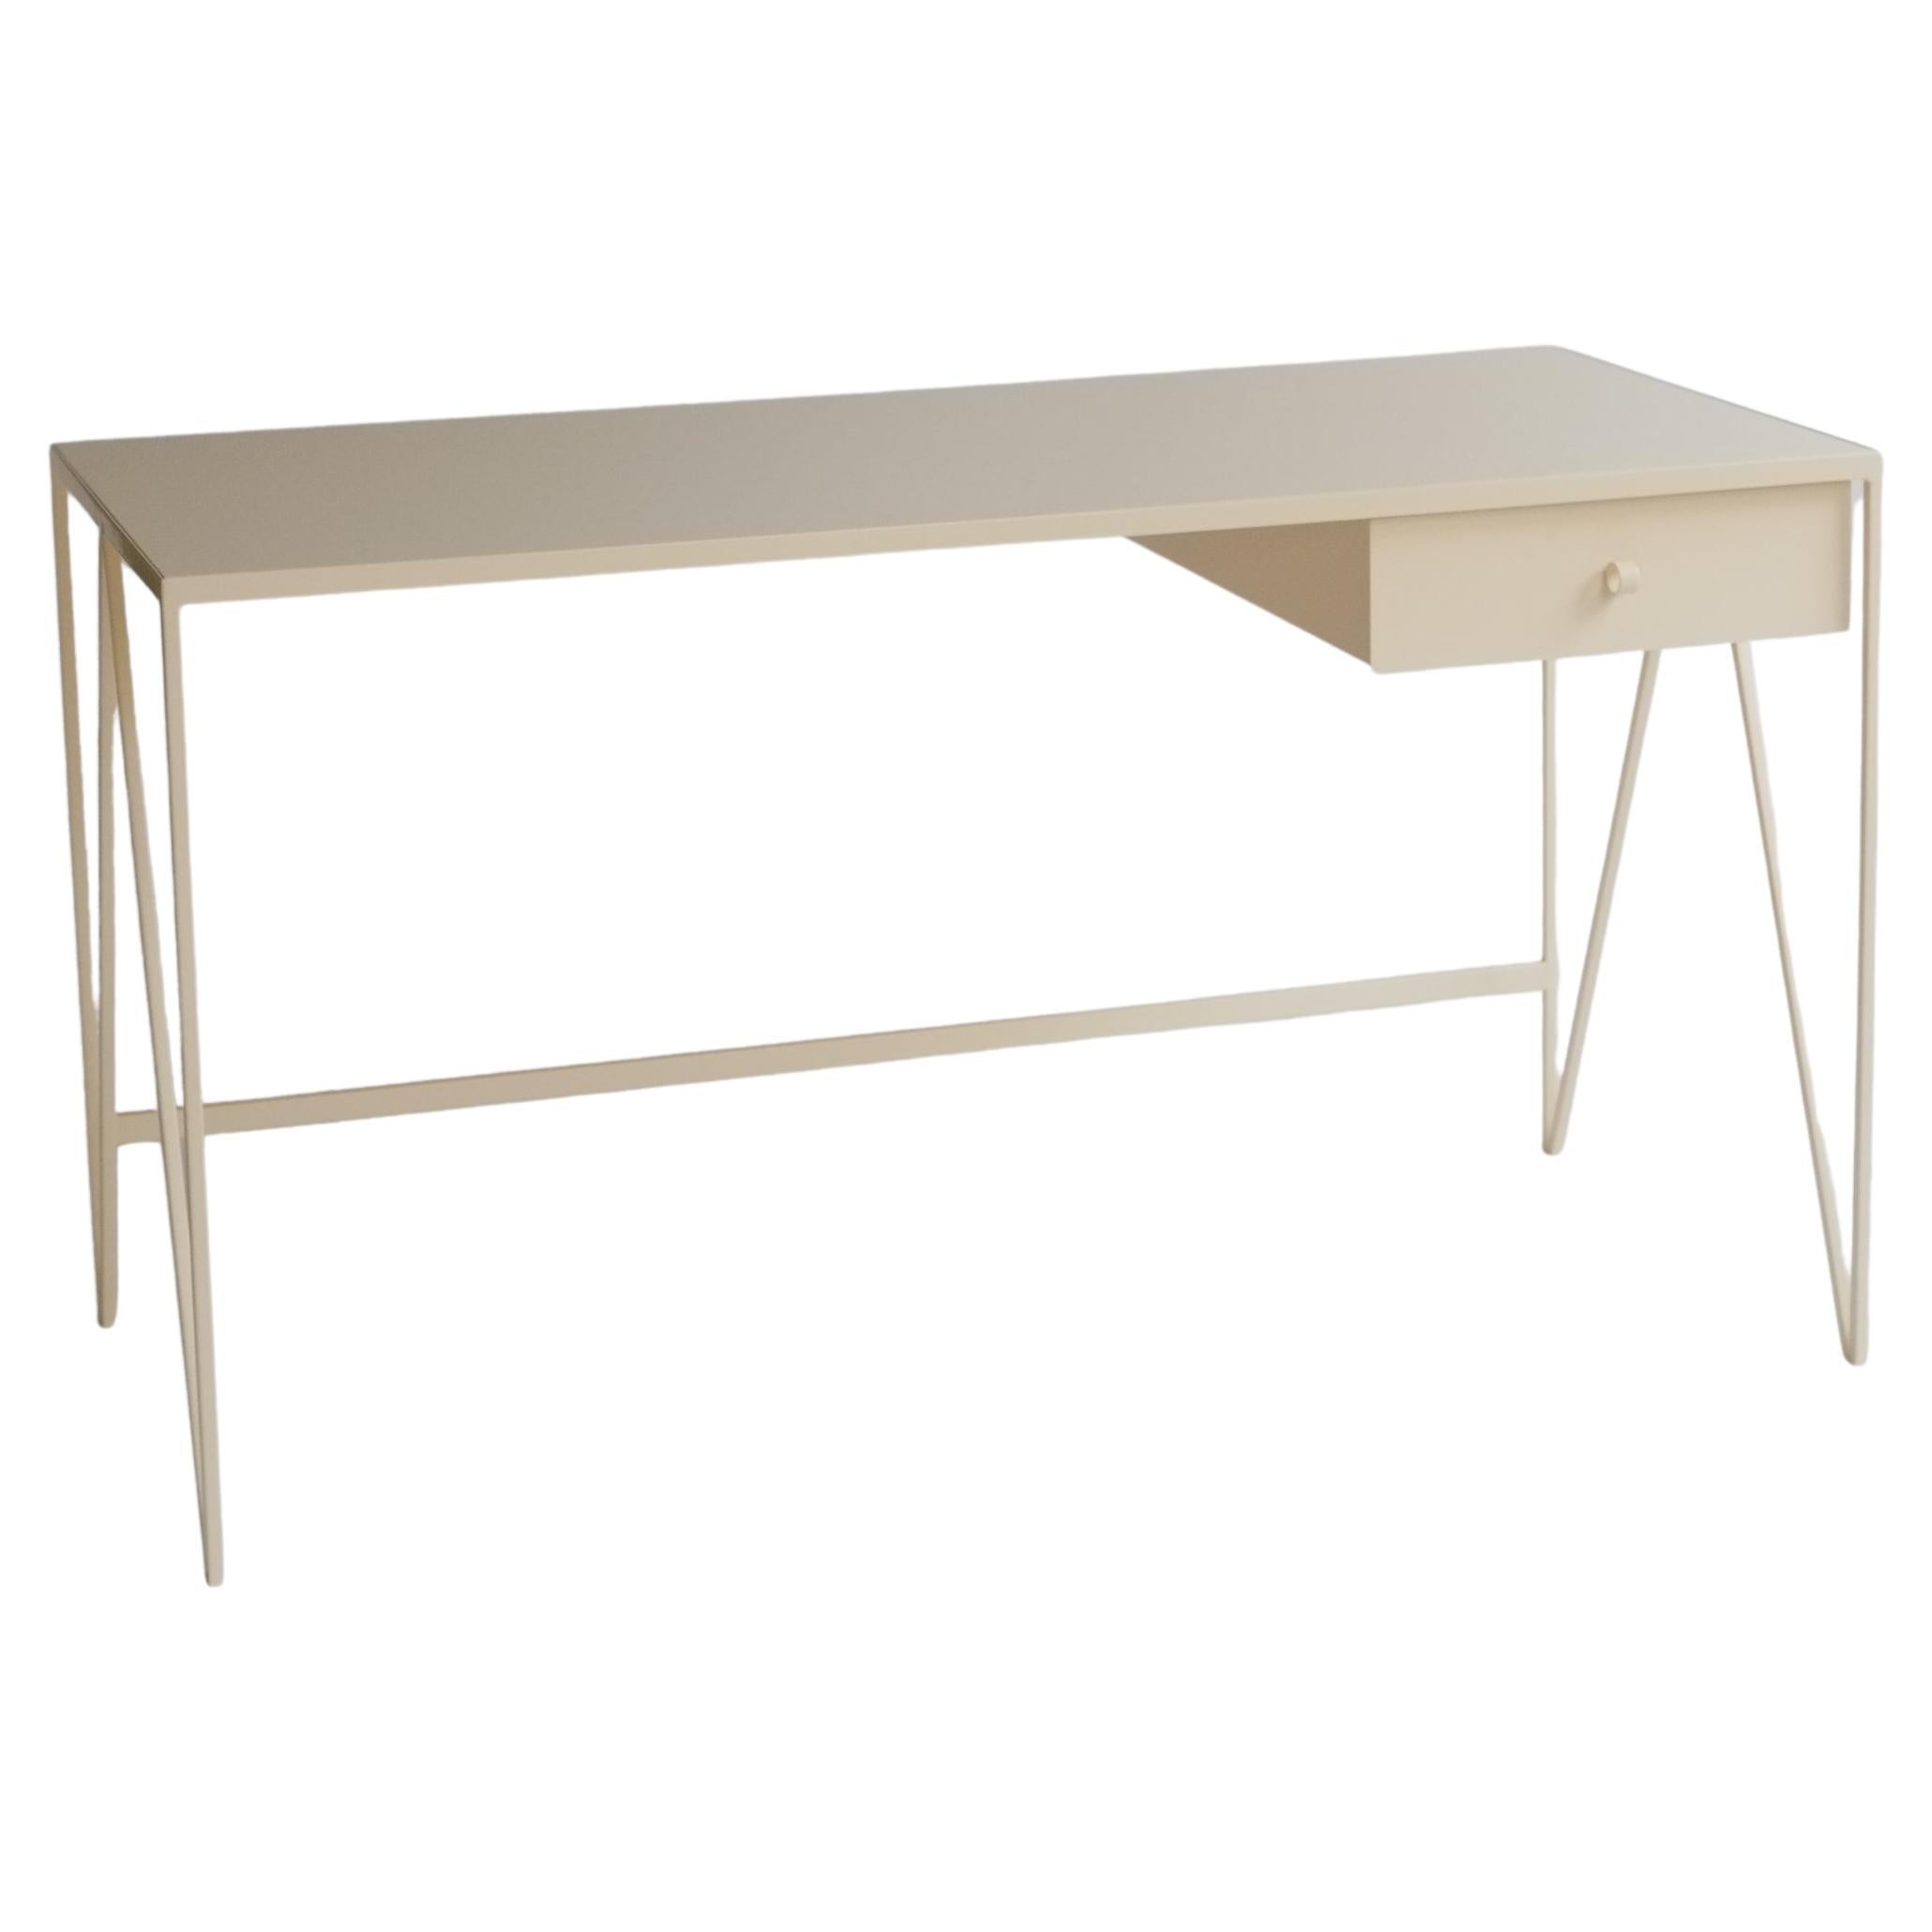 Cream Study Desk with Natural Linoleum Table Top and Drawer, Customisable